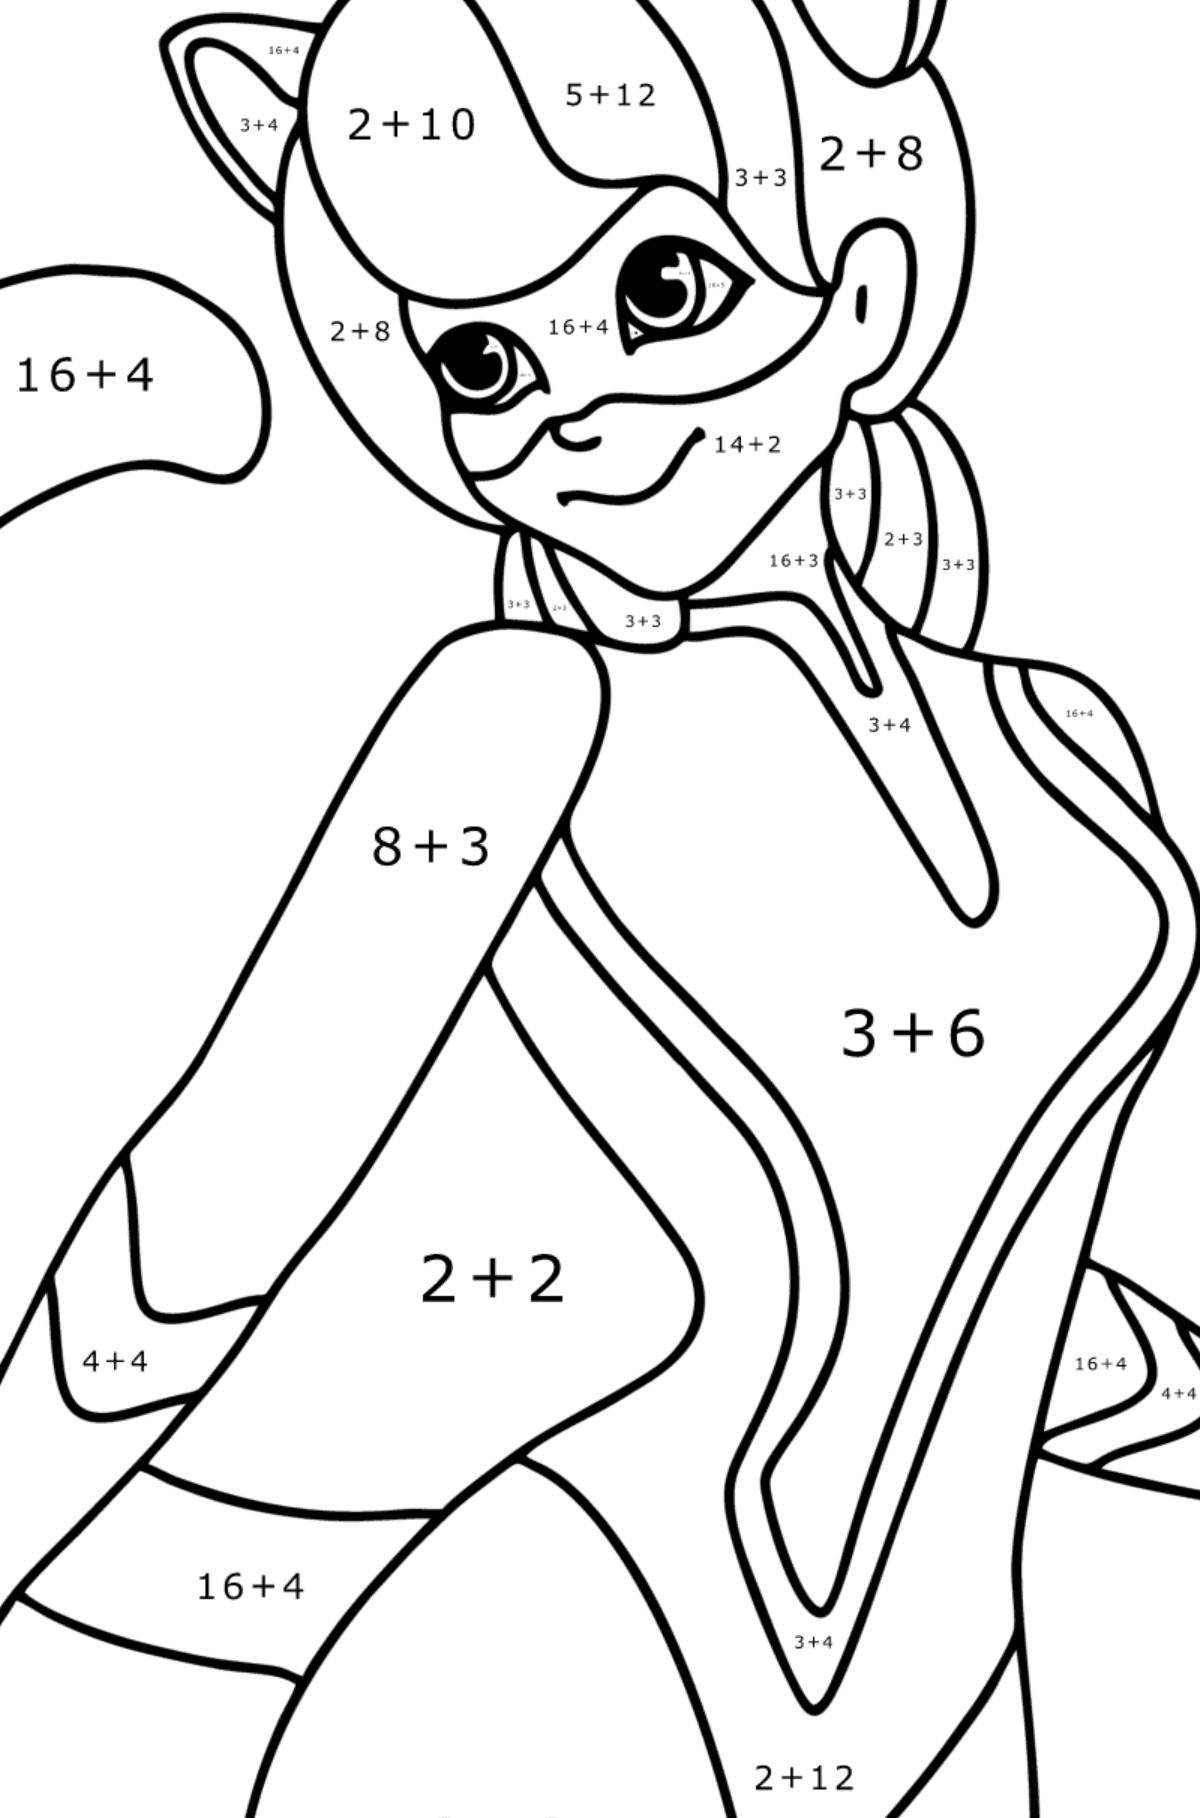 Coloring page charming cat lady